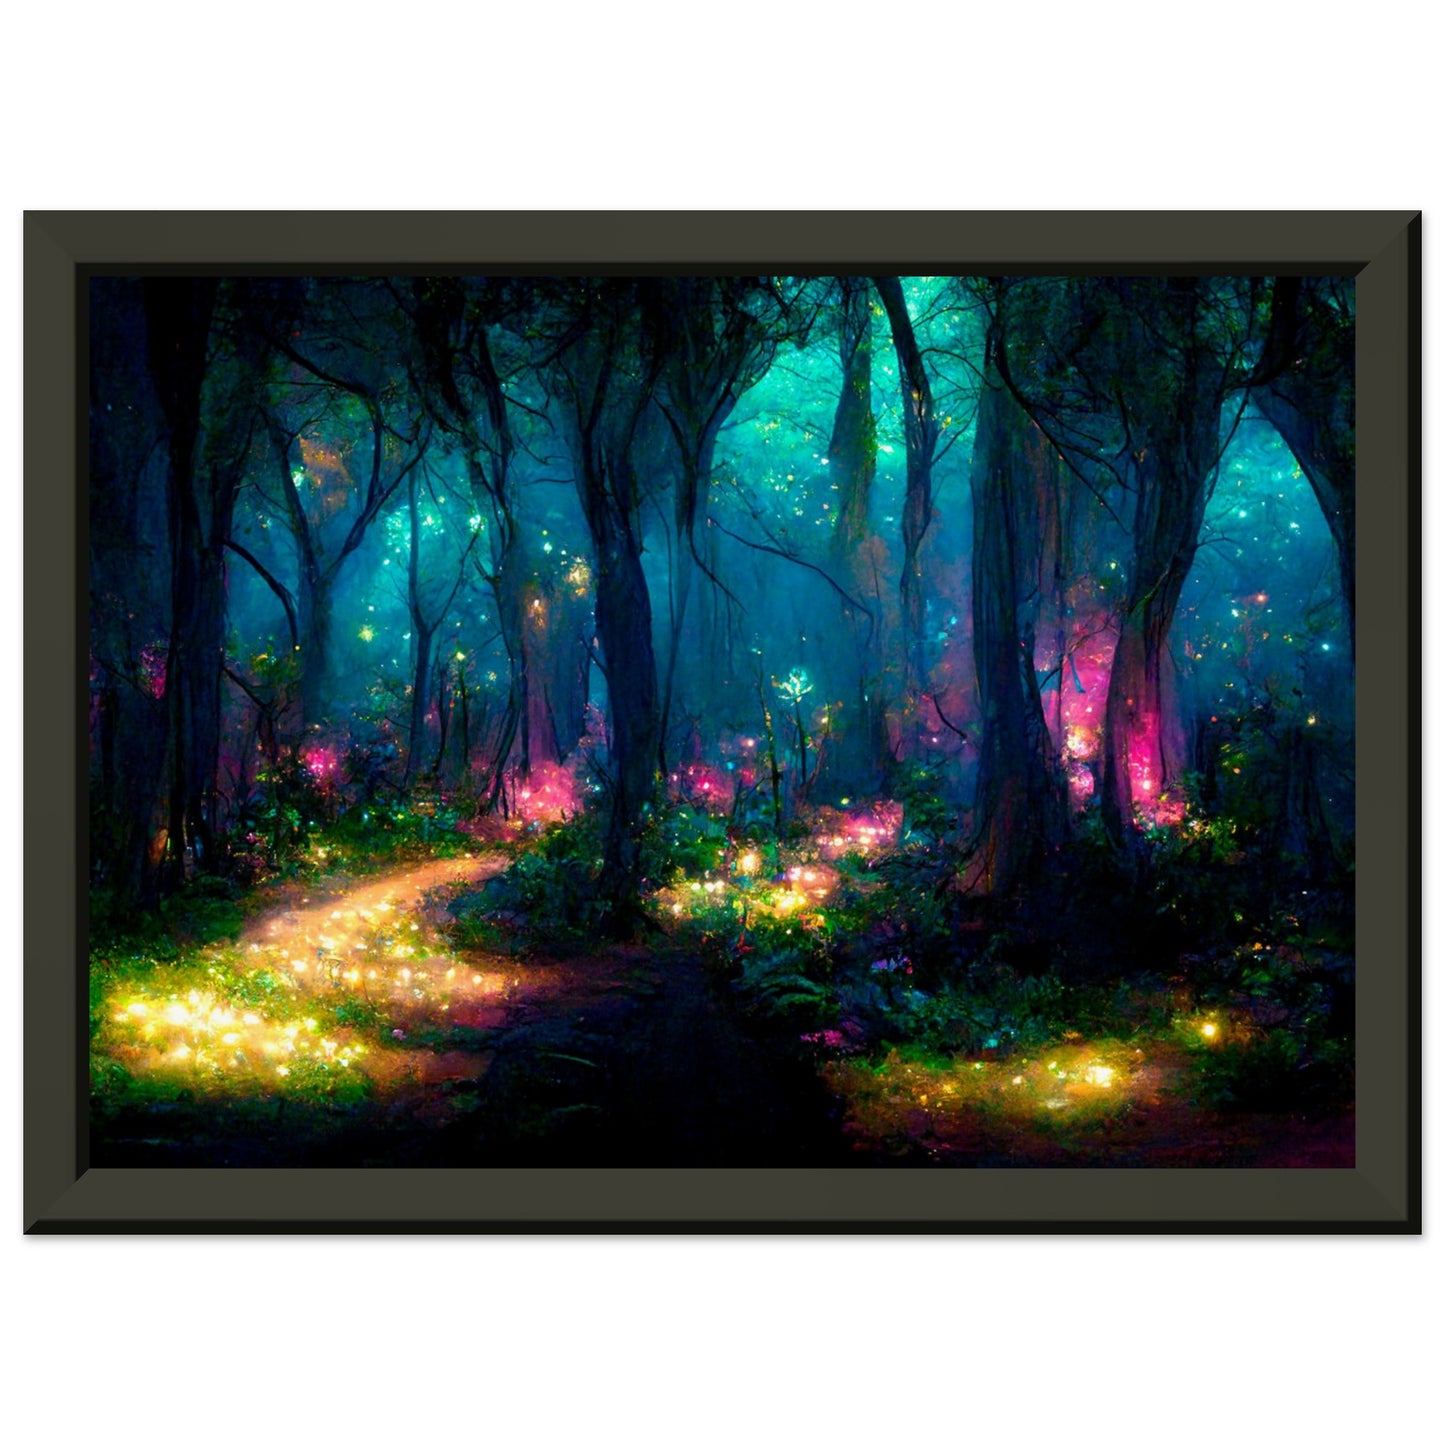 Fantasy forest at night